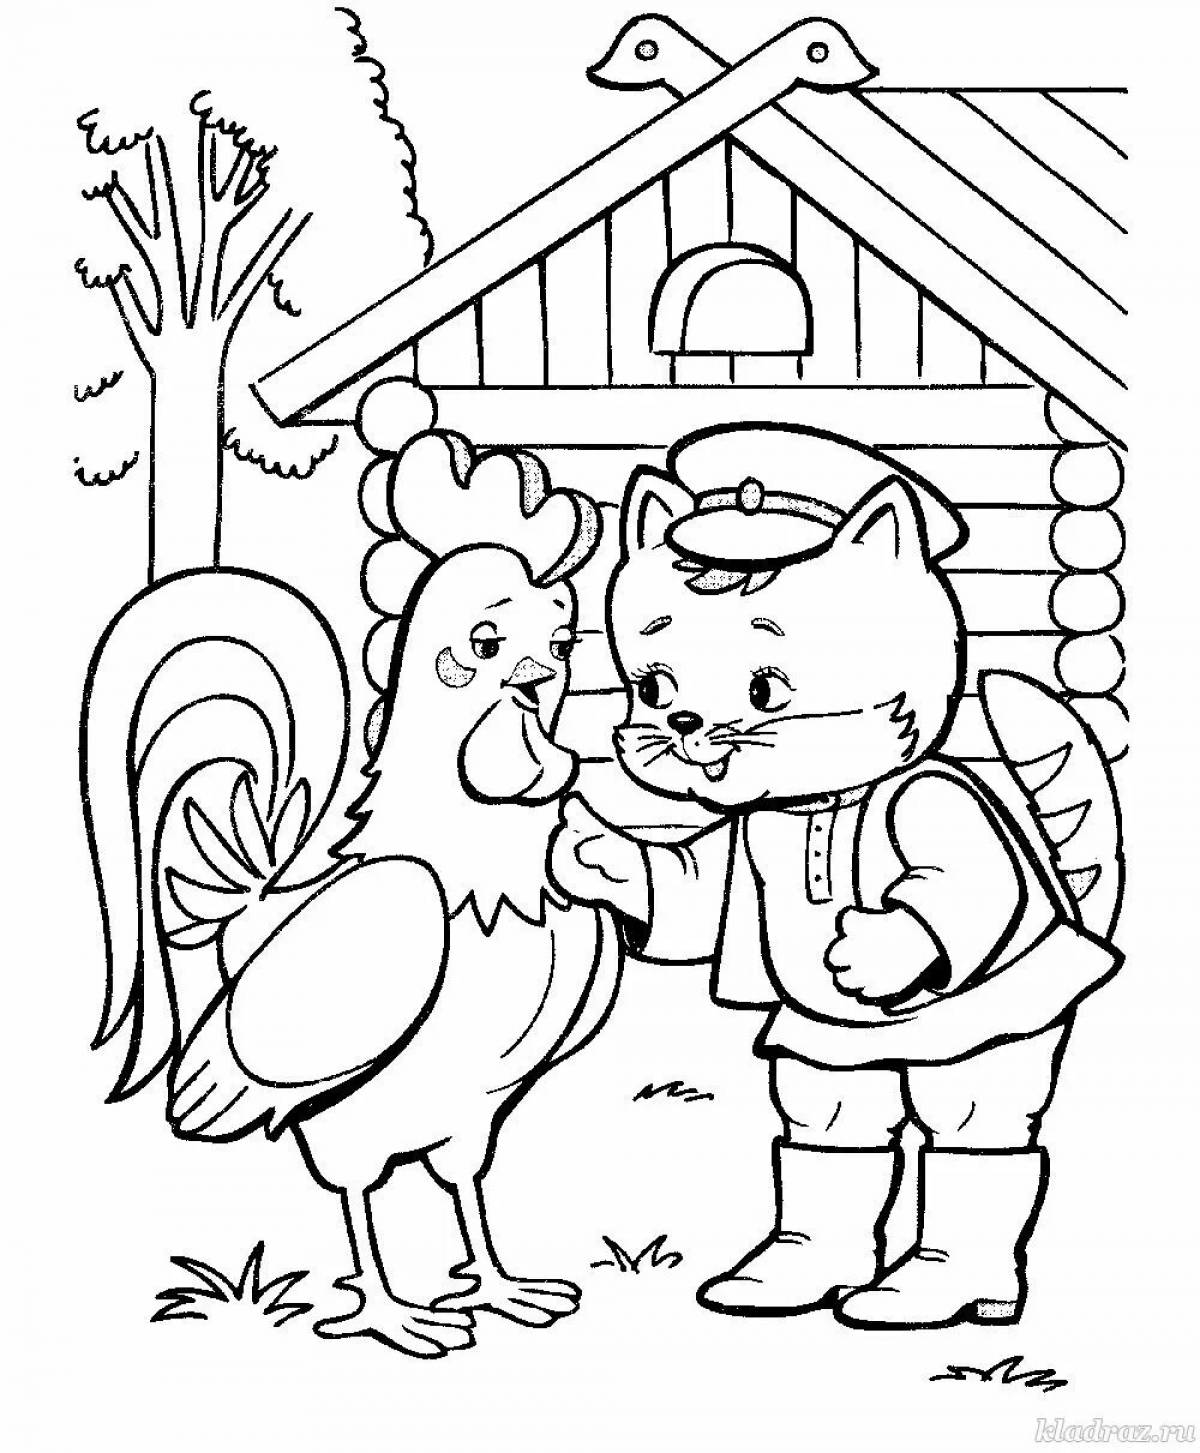 Cat cock and fox #8